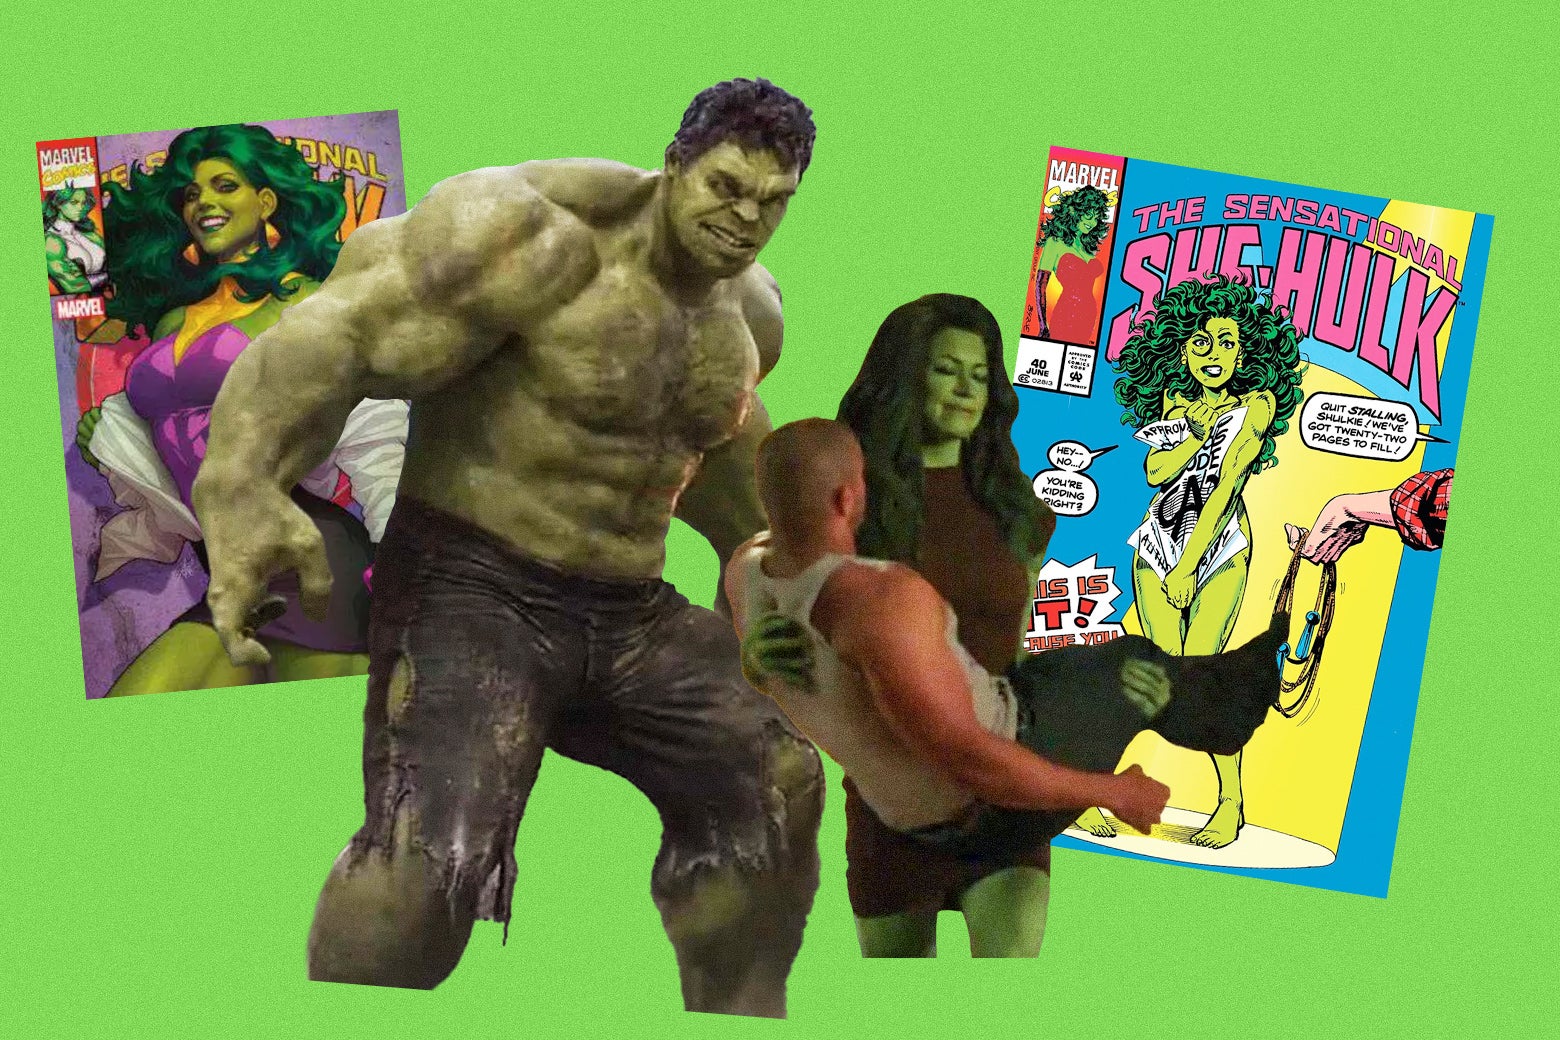 Hulk and She-Hulk a history of the sex lives of the Marvel characters.